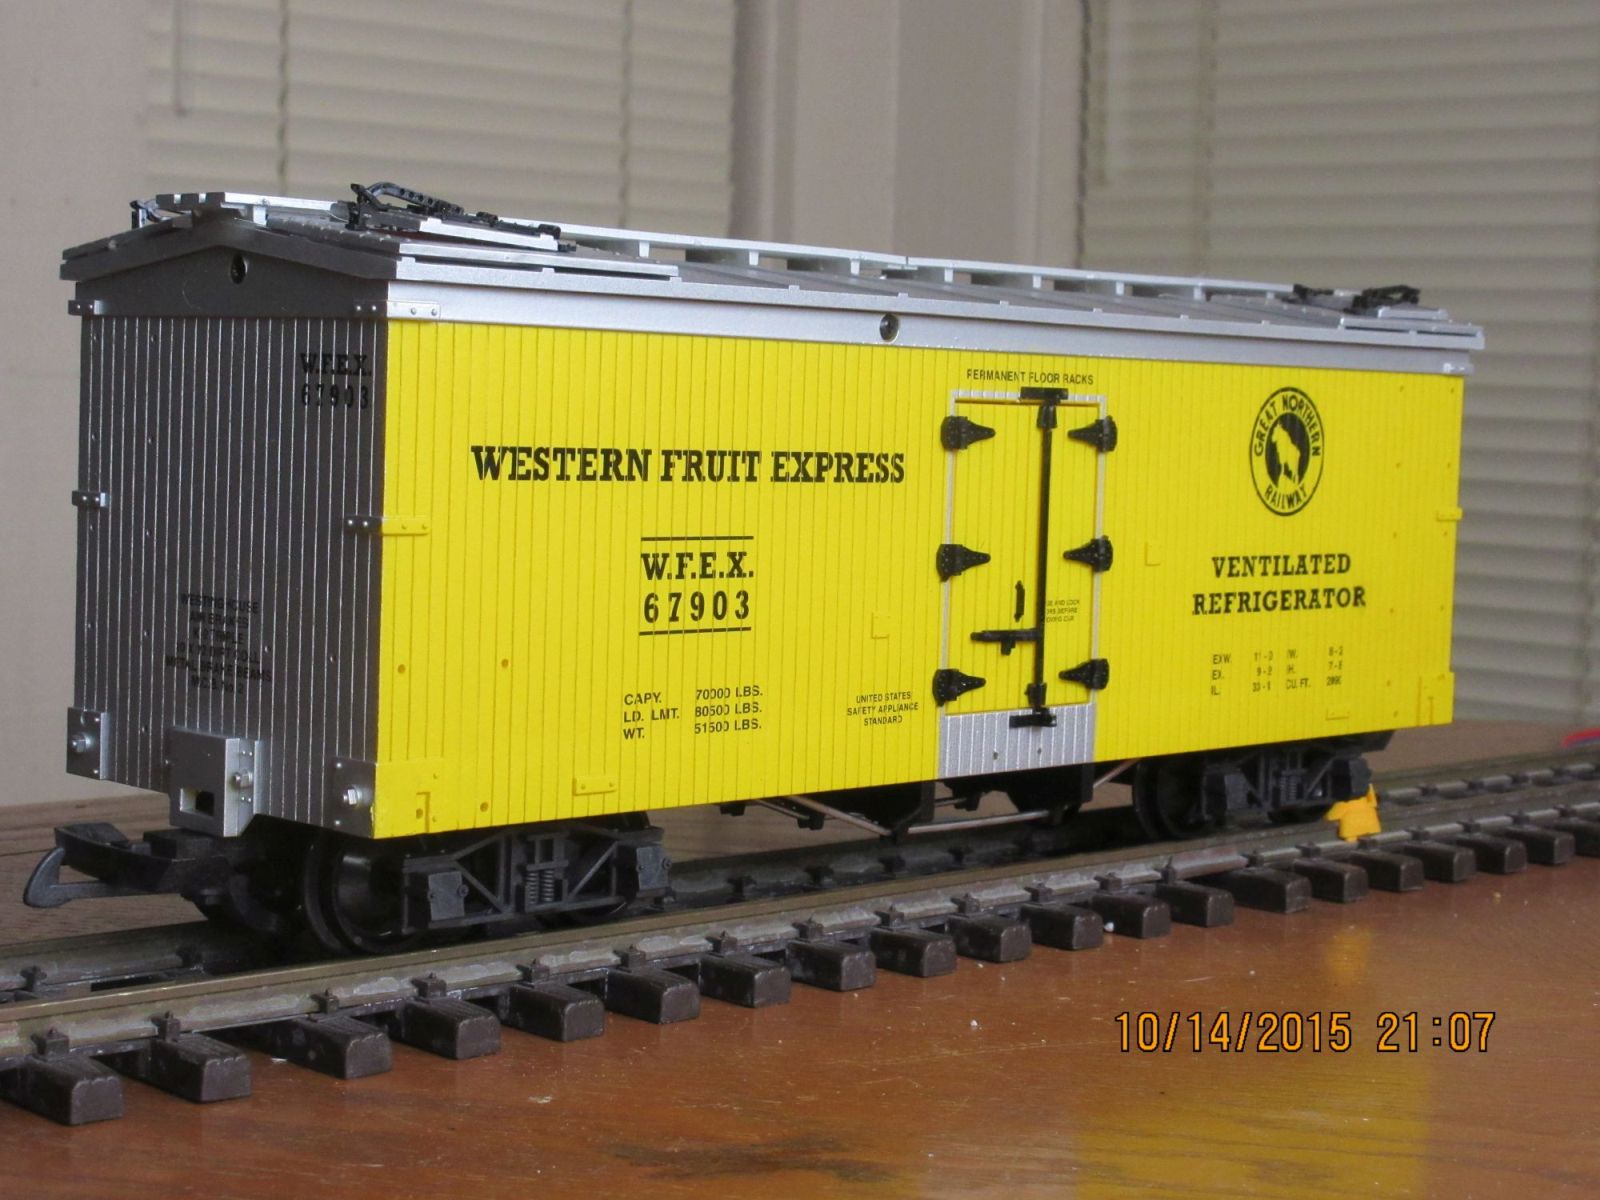 R16494 A Western Fruit Express WFEX 67903